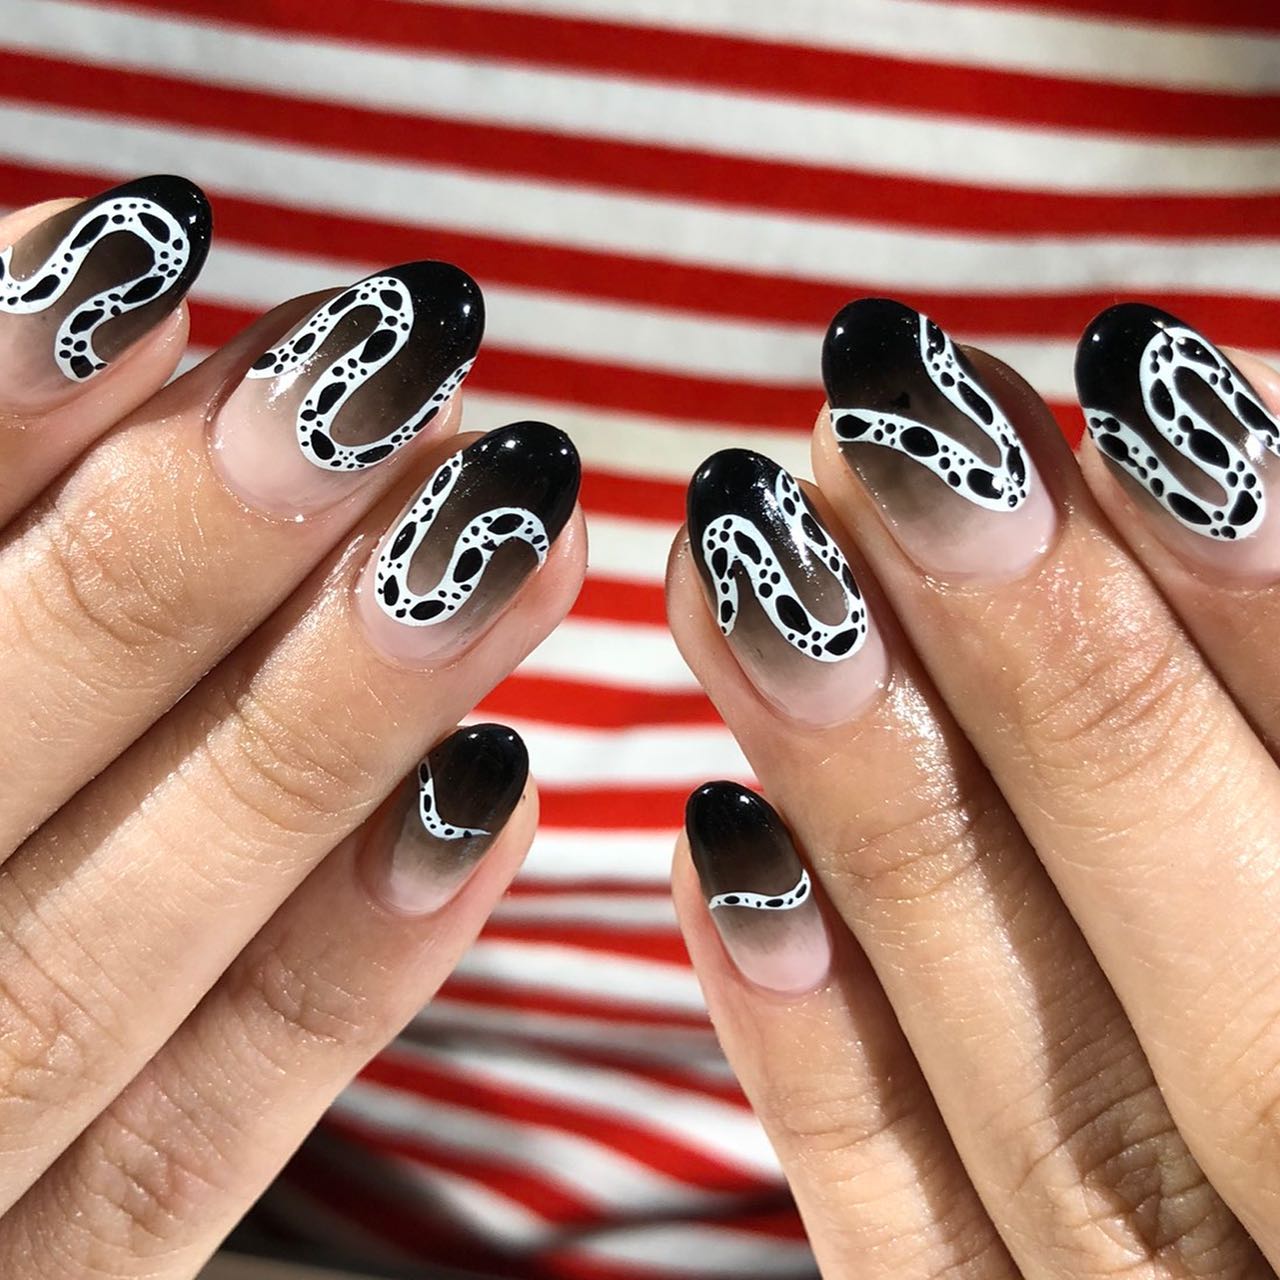 50+ Cool Halloween Nail Ideas Of 2022 images 3